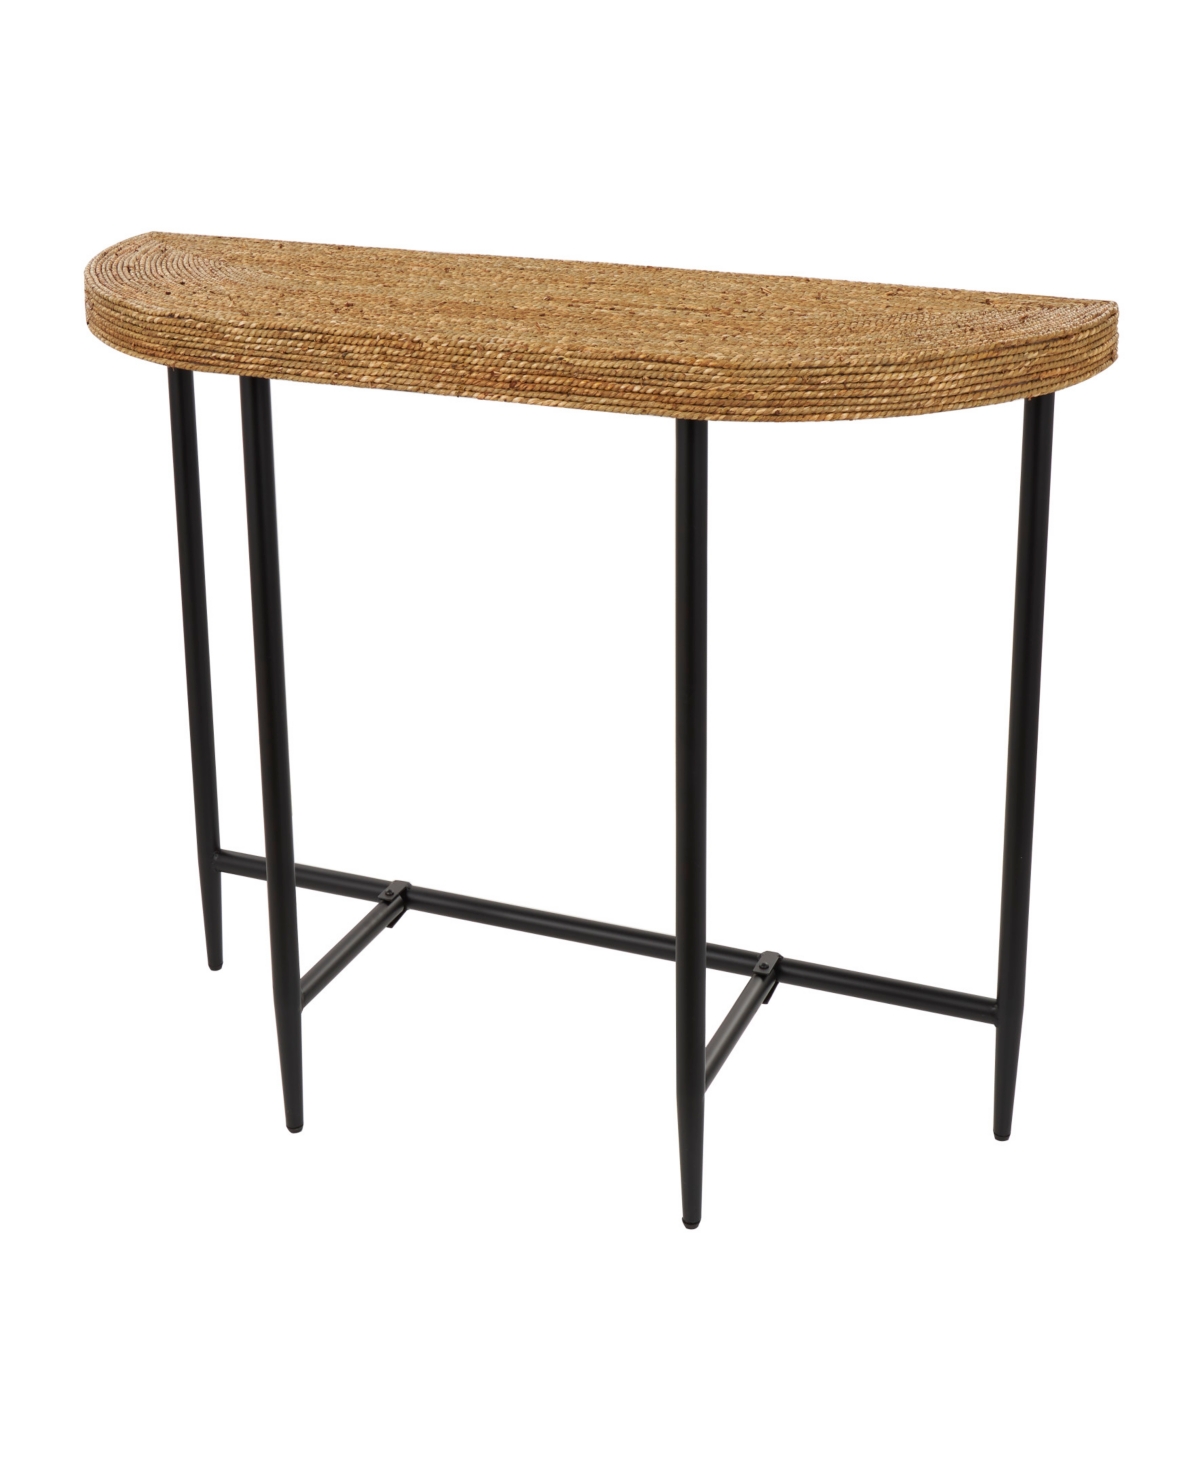 Shop Rosemary Lane 48" X 16" X 32" Seagrass Woven Half Moon Black Metal Legs Console Table In Brown